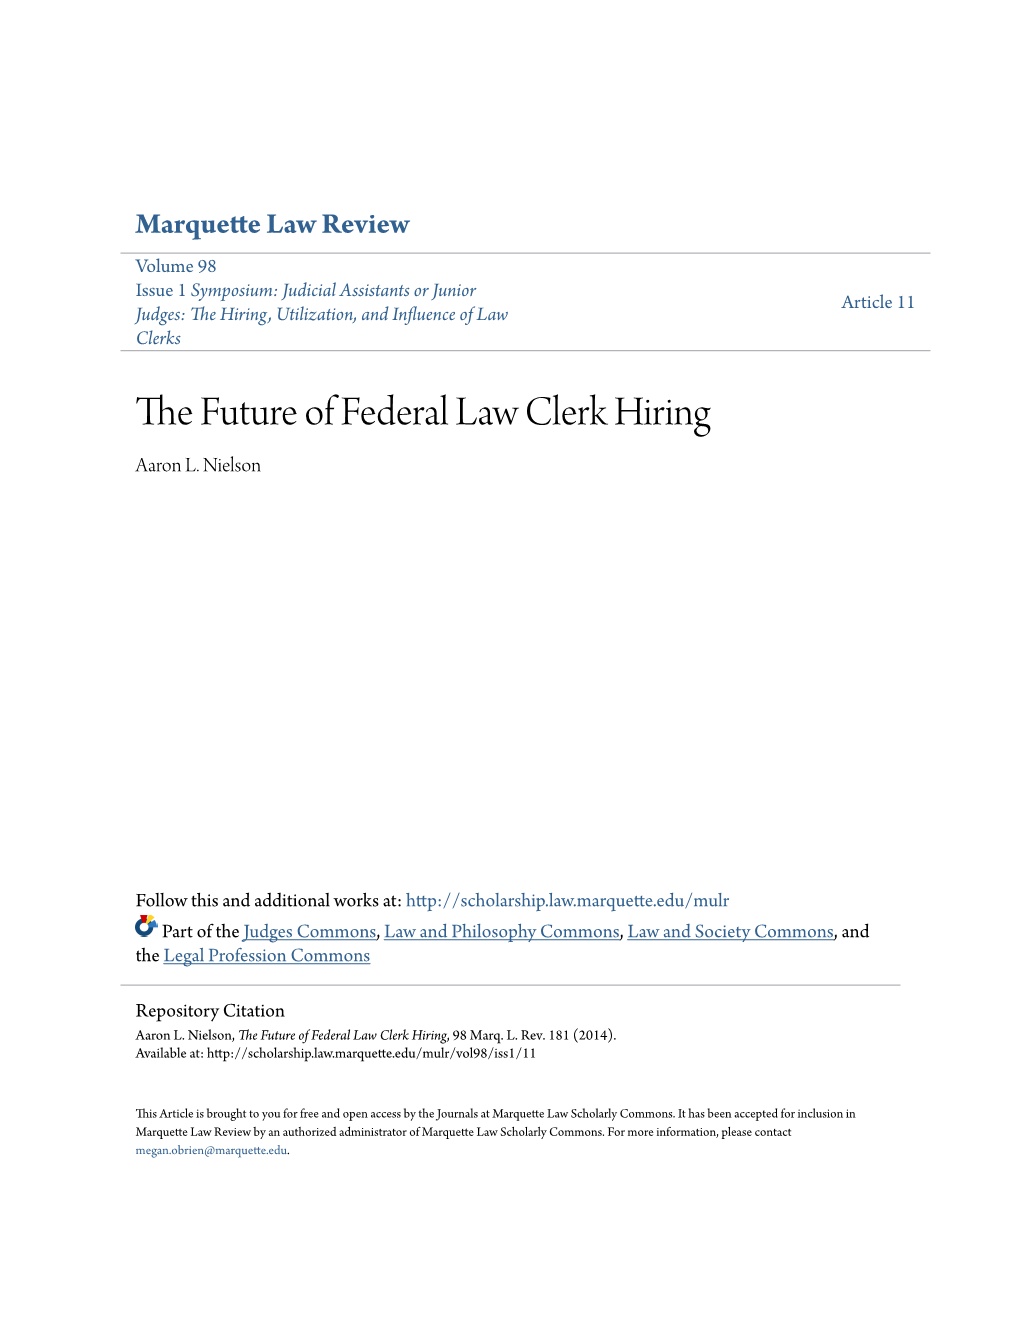 The Future of Federal Law Clerk Hiring, 98 Marq